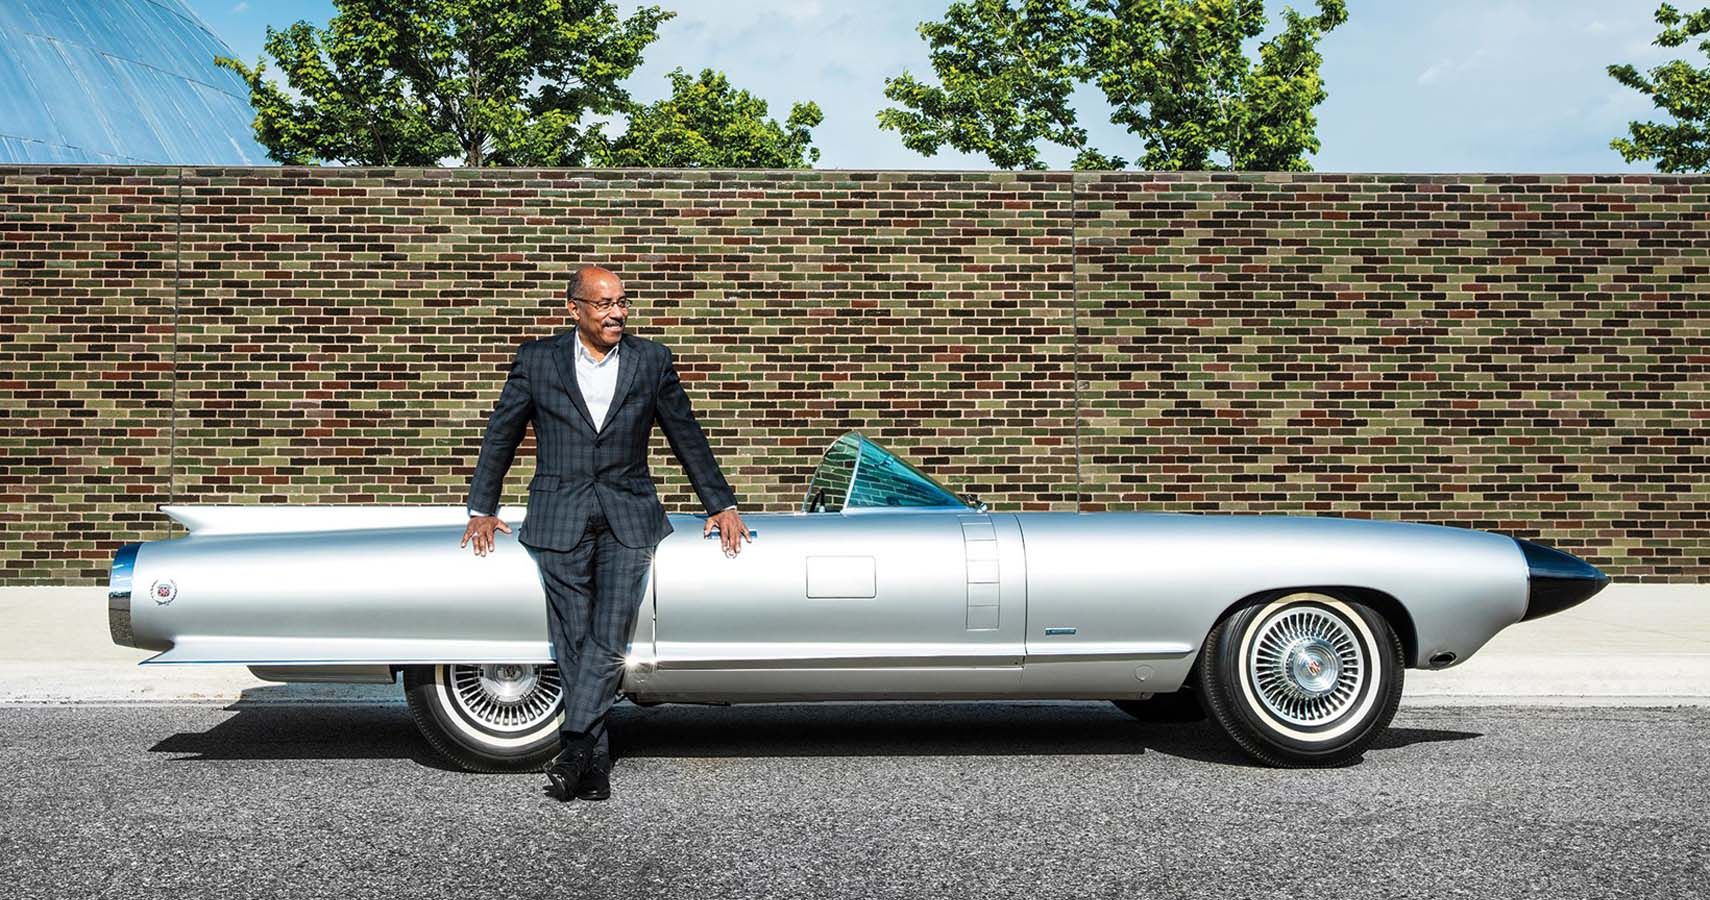 The Cadillac Cyclone Is One Of The Many Automobiles That Drove Ed Welburn To Become A Car Designer, And Later Even Chief Of Design At GM Itself